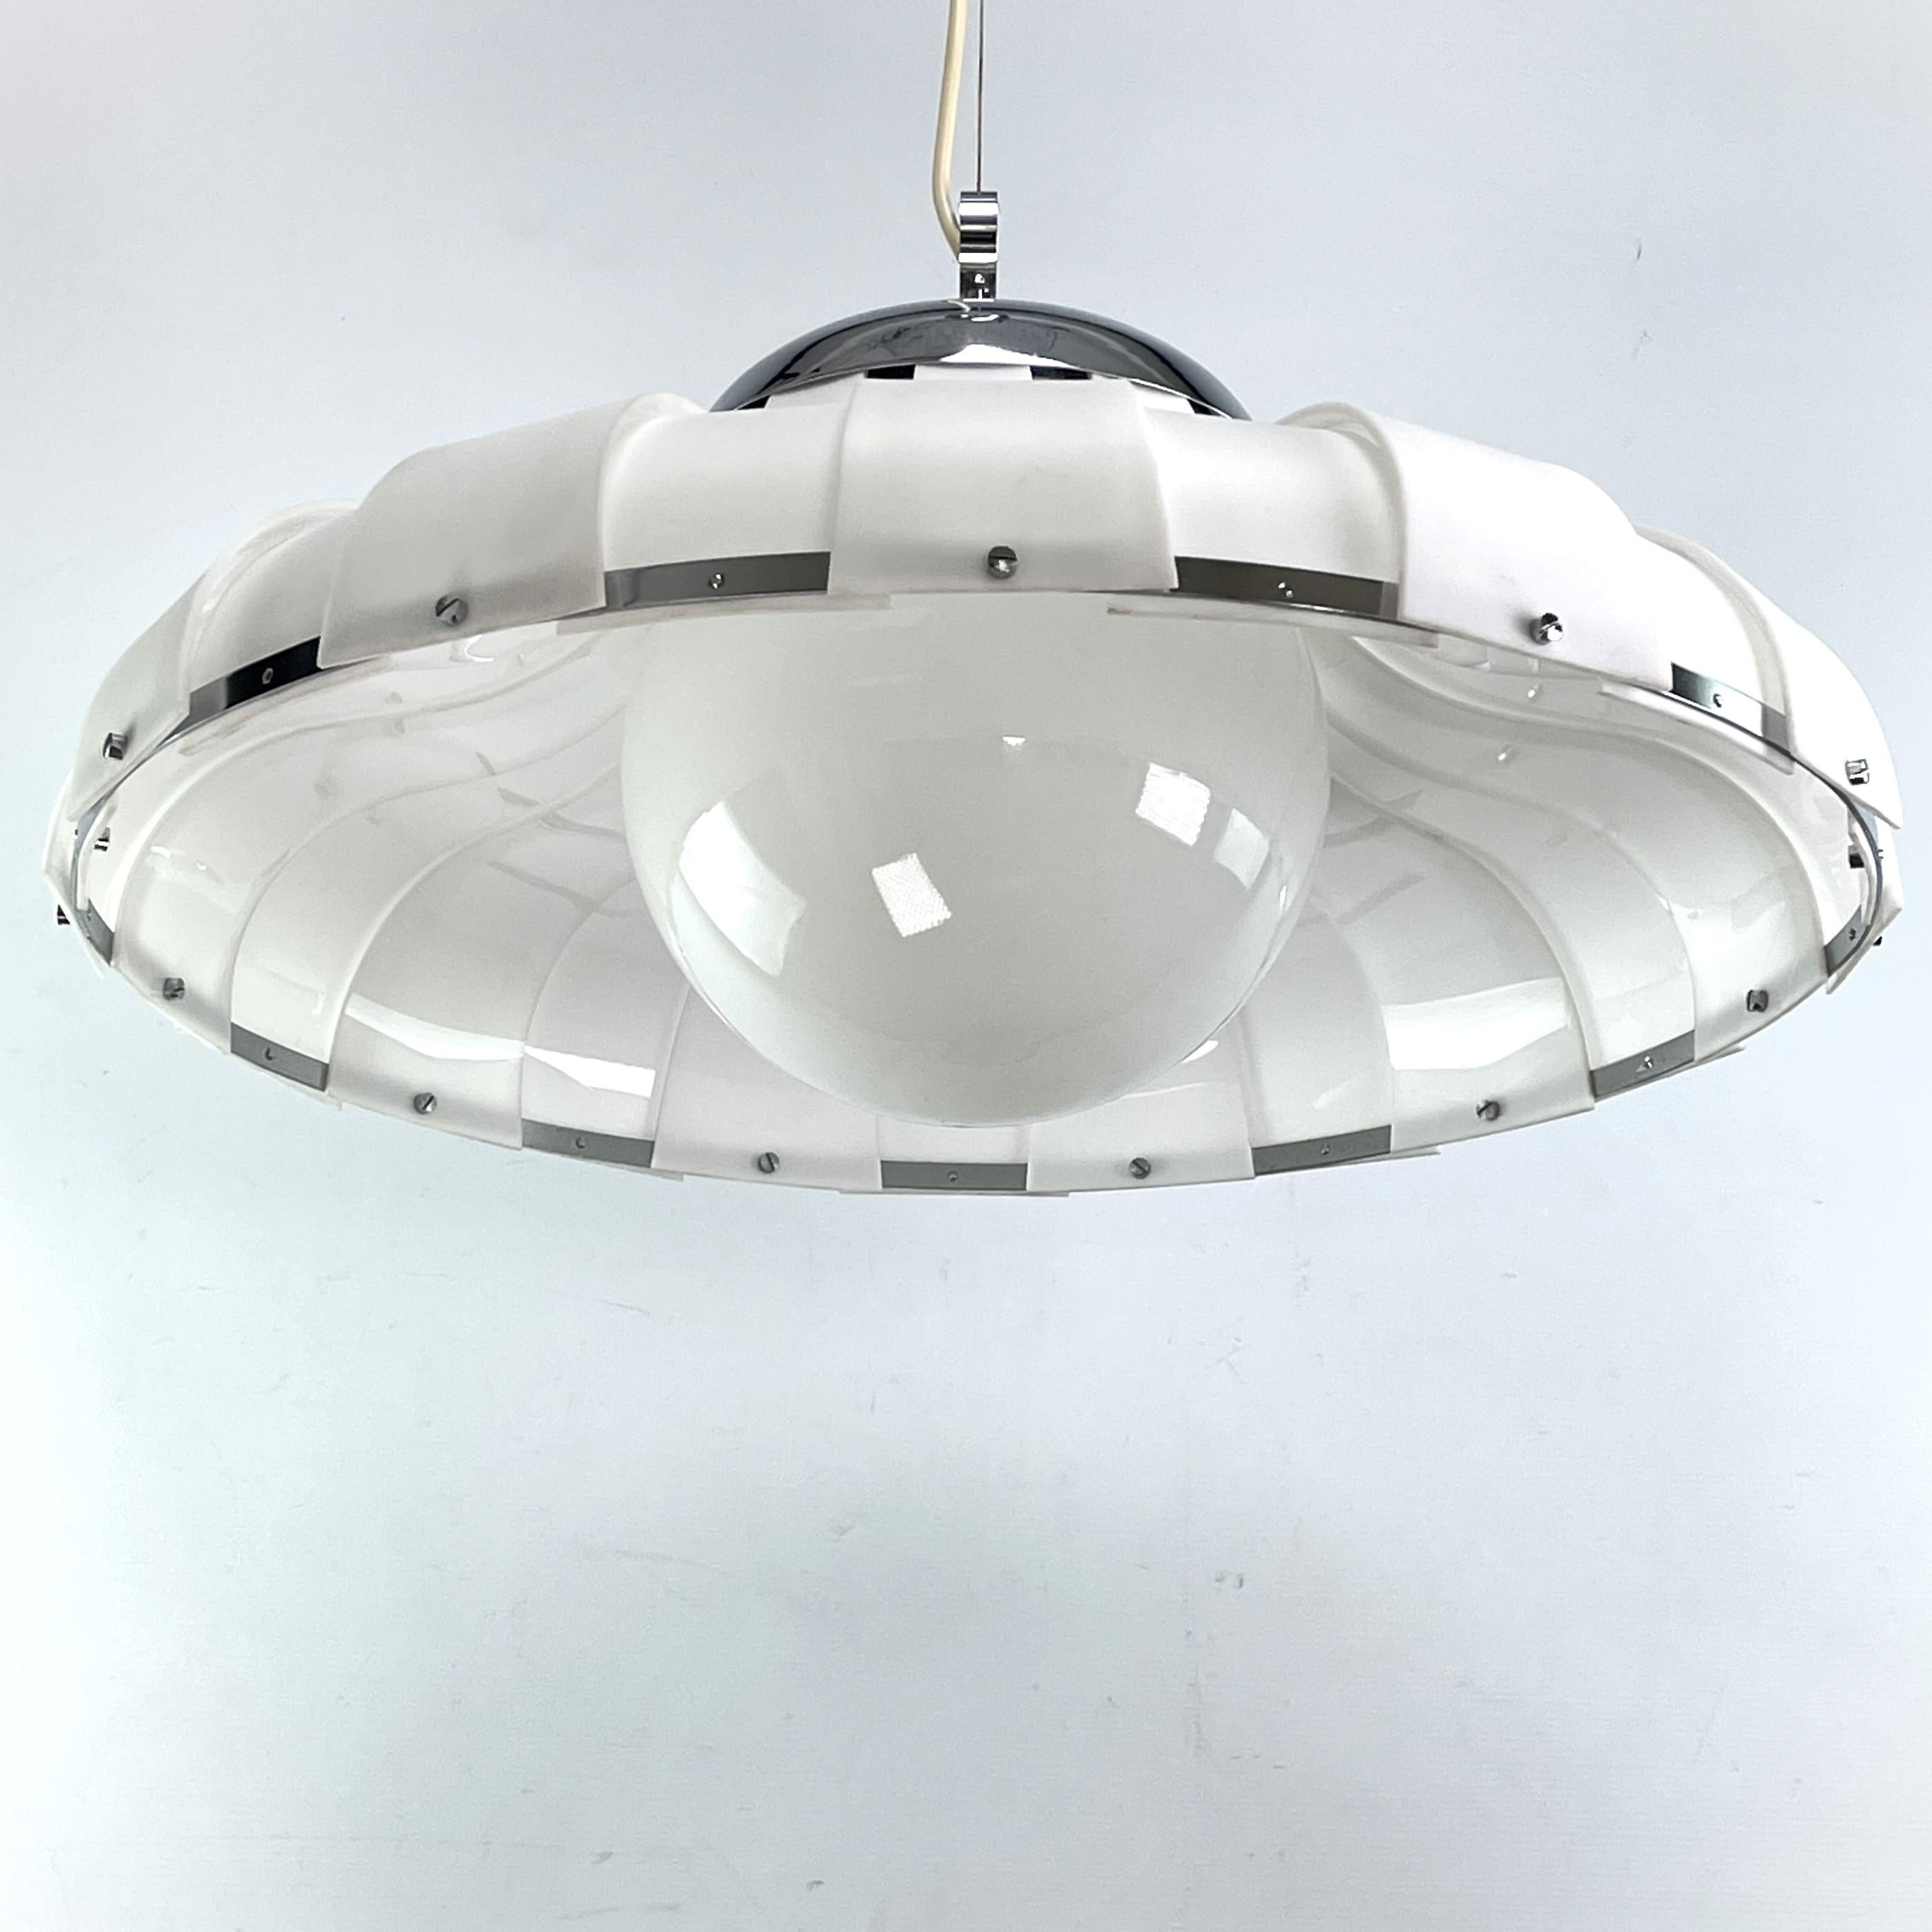 ceiling lamp by Harvey Guzzini for Mablo - 1970s.

This beautiful lamp is a real design classic from the 70s. This lamp with its unusual design is a highlight for any lounge interior.
This model was designed by Harvey Guzzini and comes from the